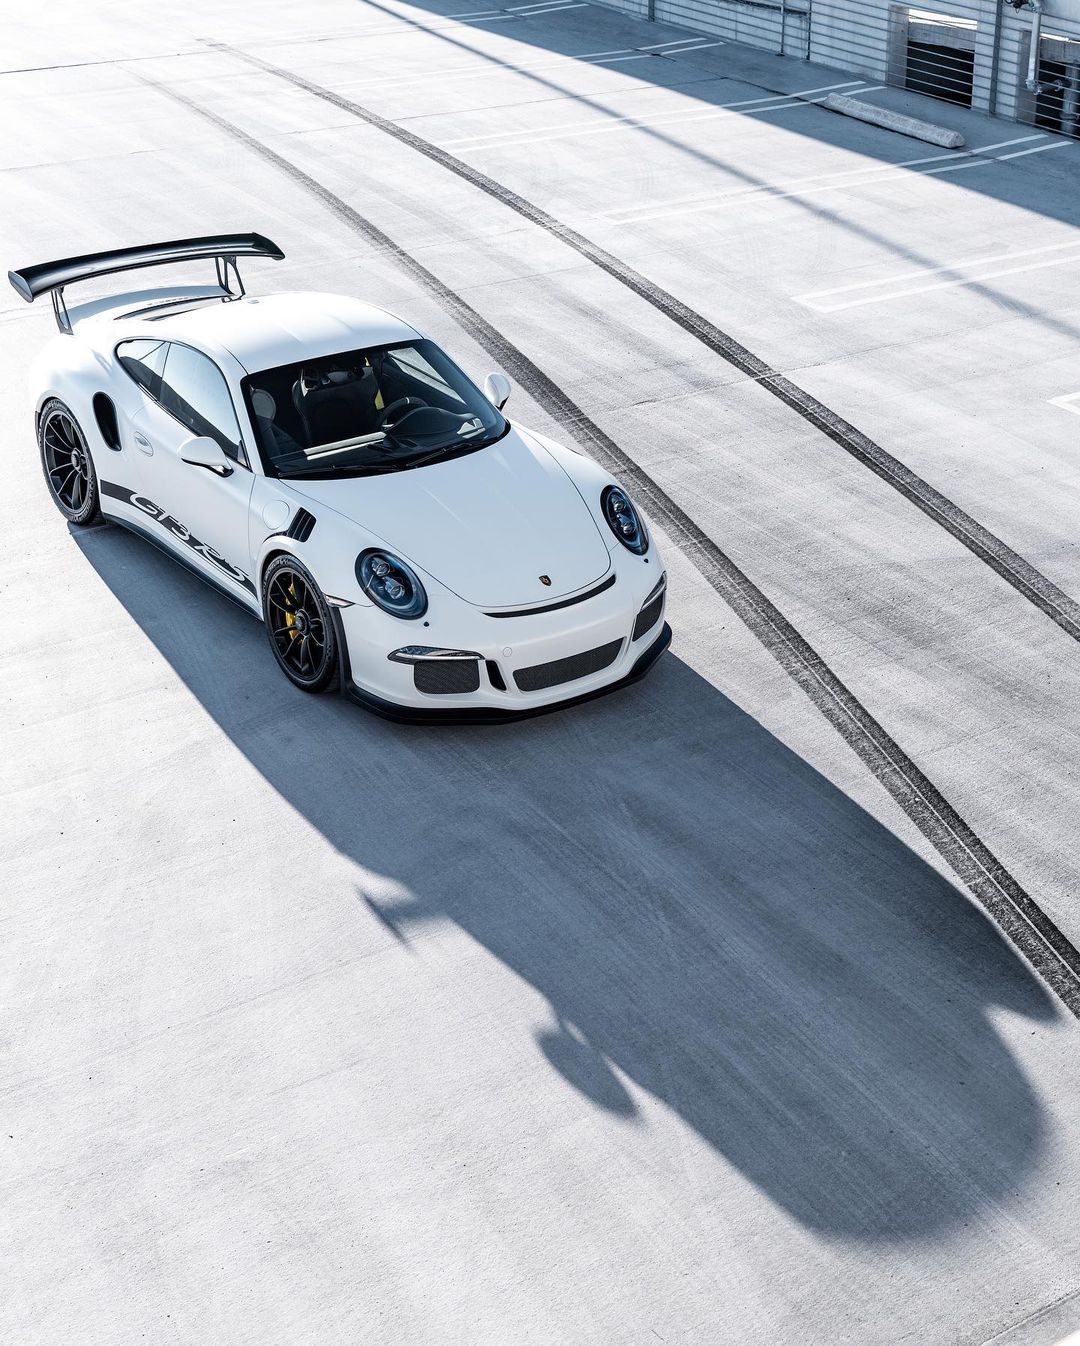 Carrera White Porsche 911 GT3 RS on racetrack, aerial view